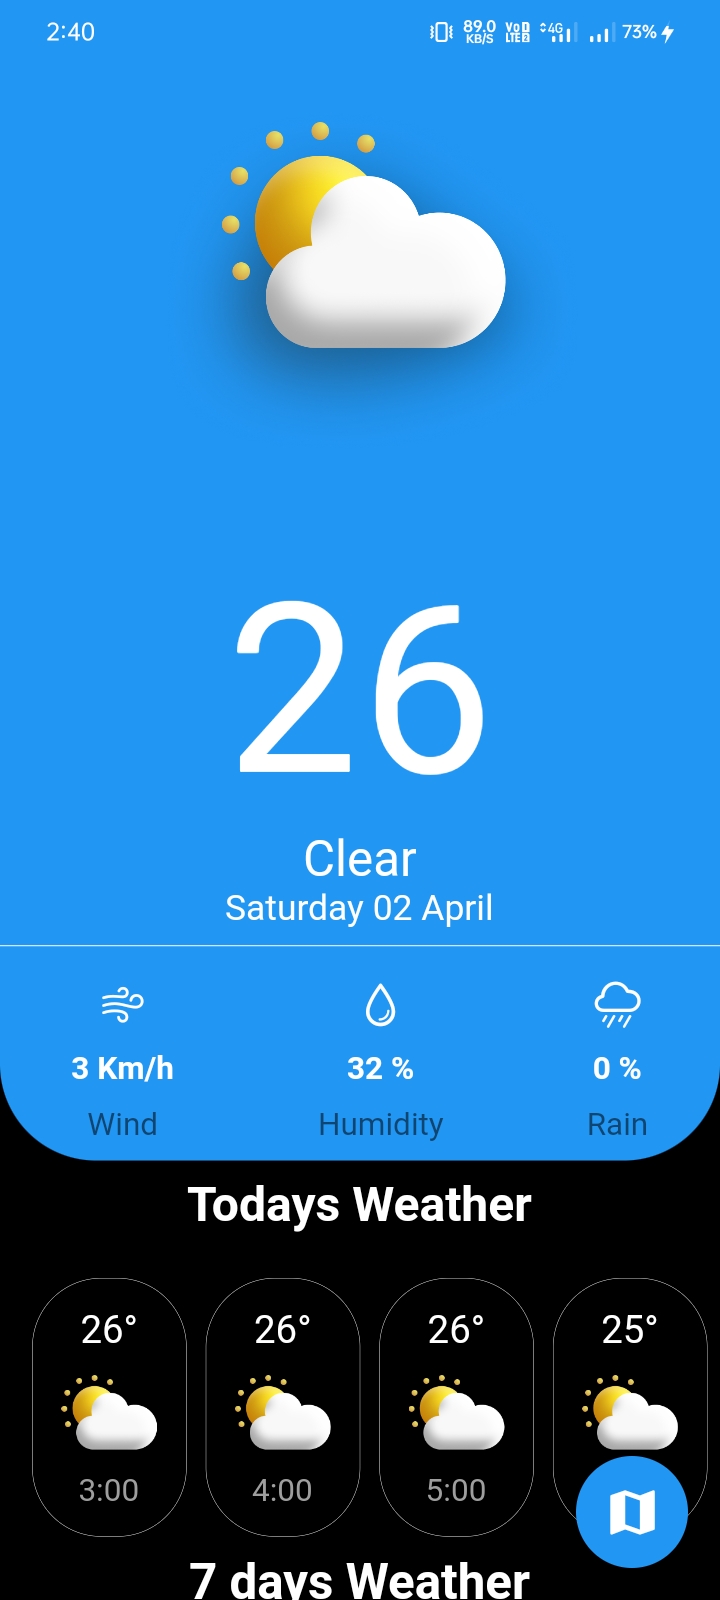 Weather App Using OpenWeatherMap API service Daily Forecast and Historical Weather based on users location